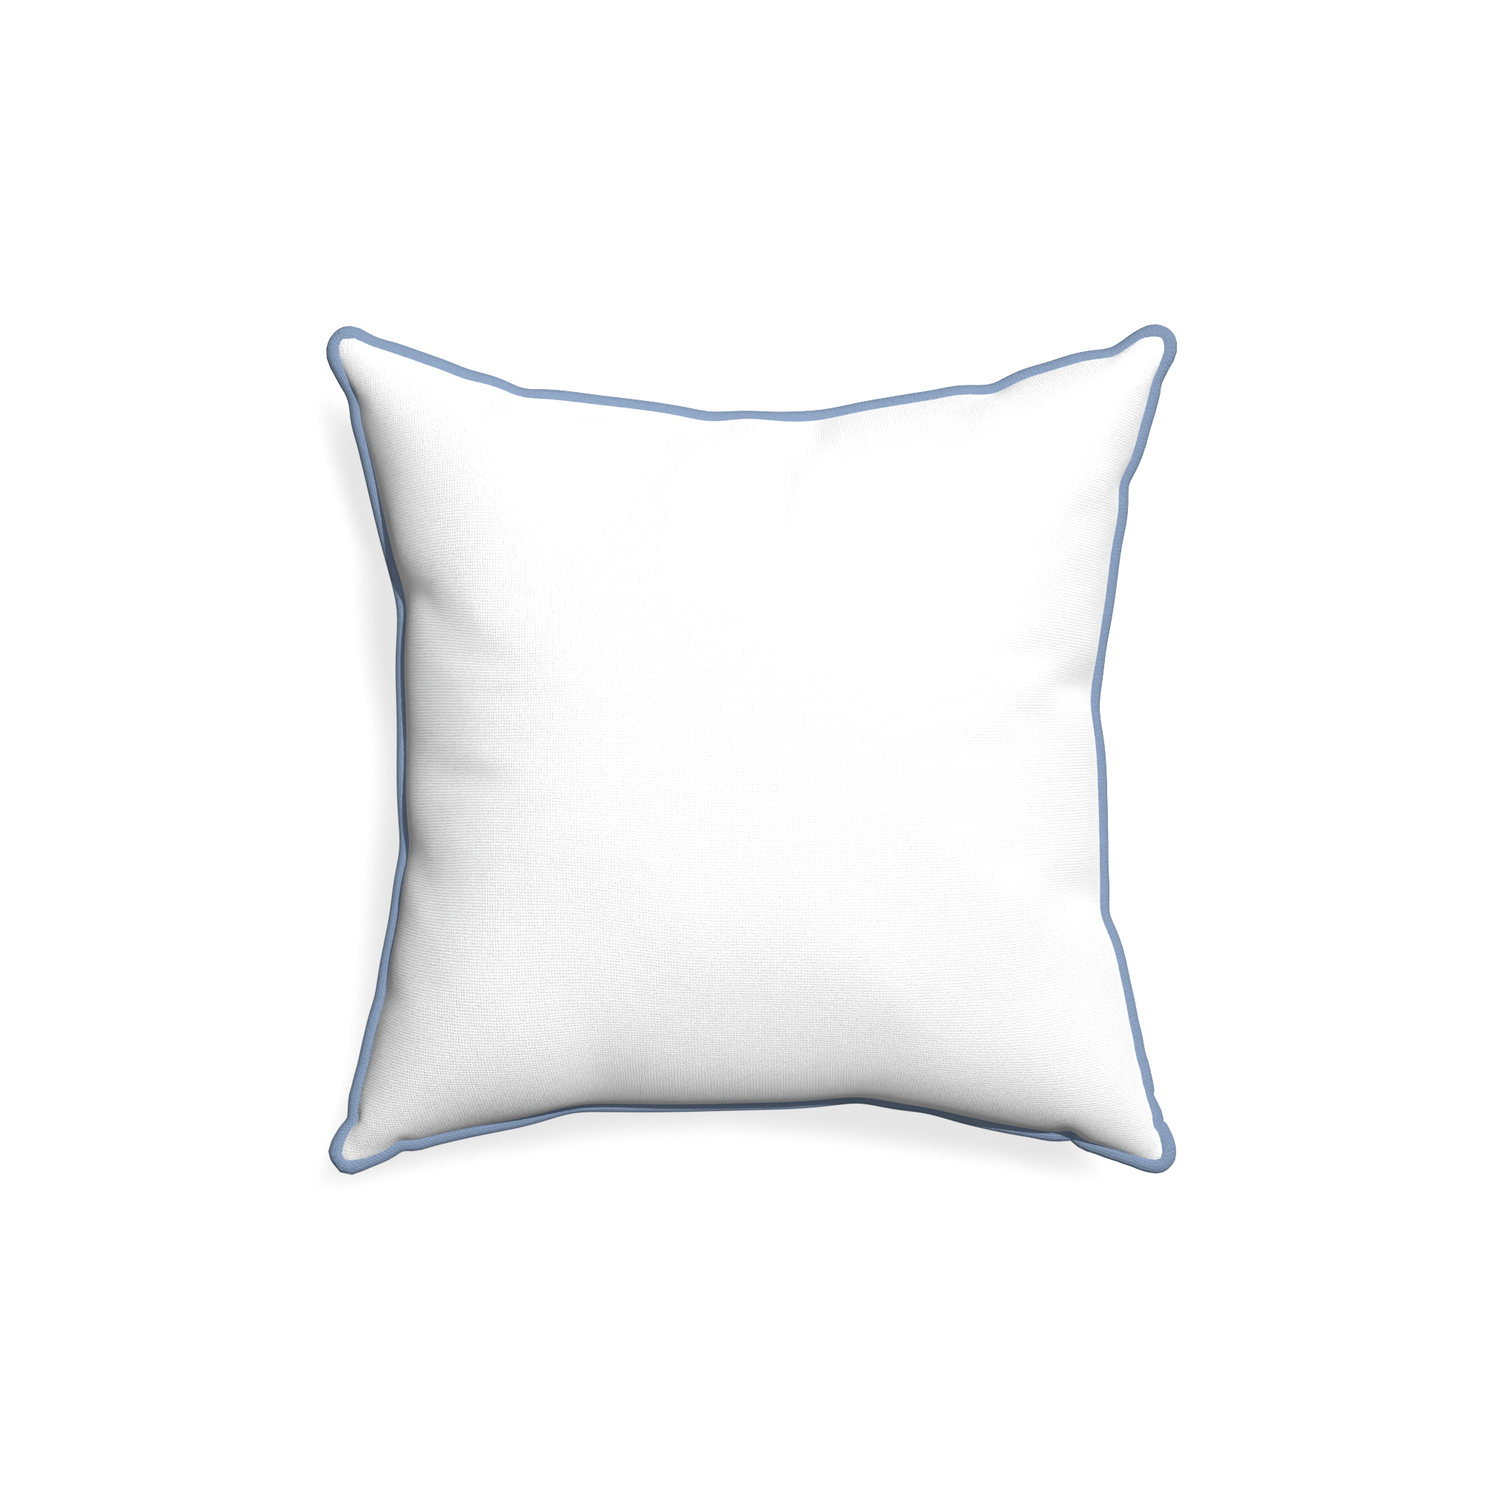 18-square snow custom white cottonpillow with sky piping on white background